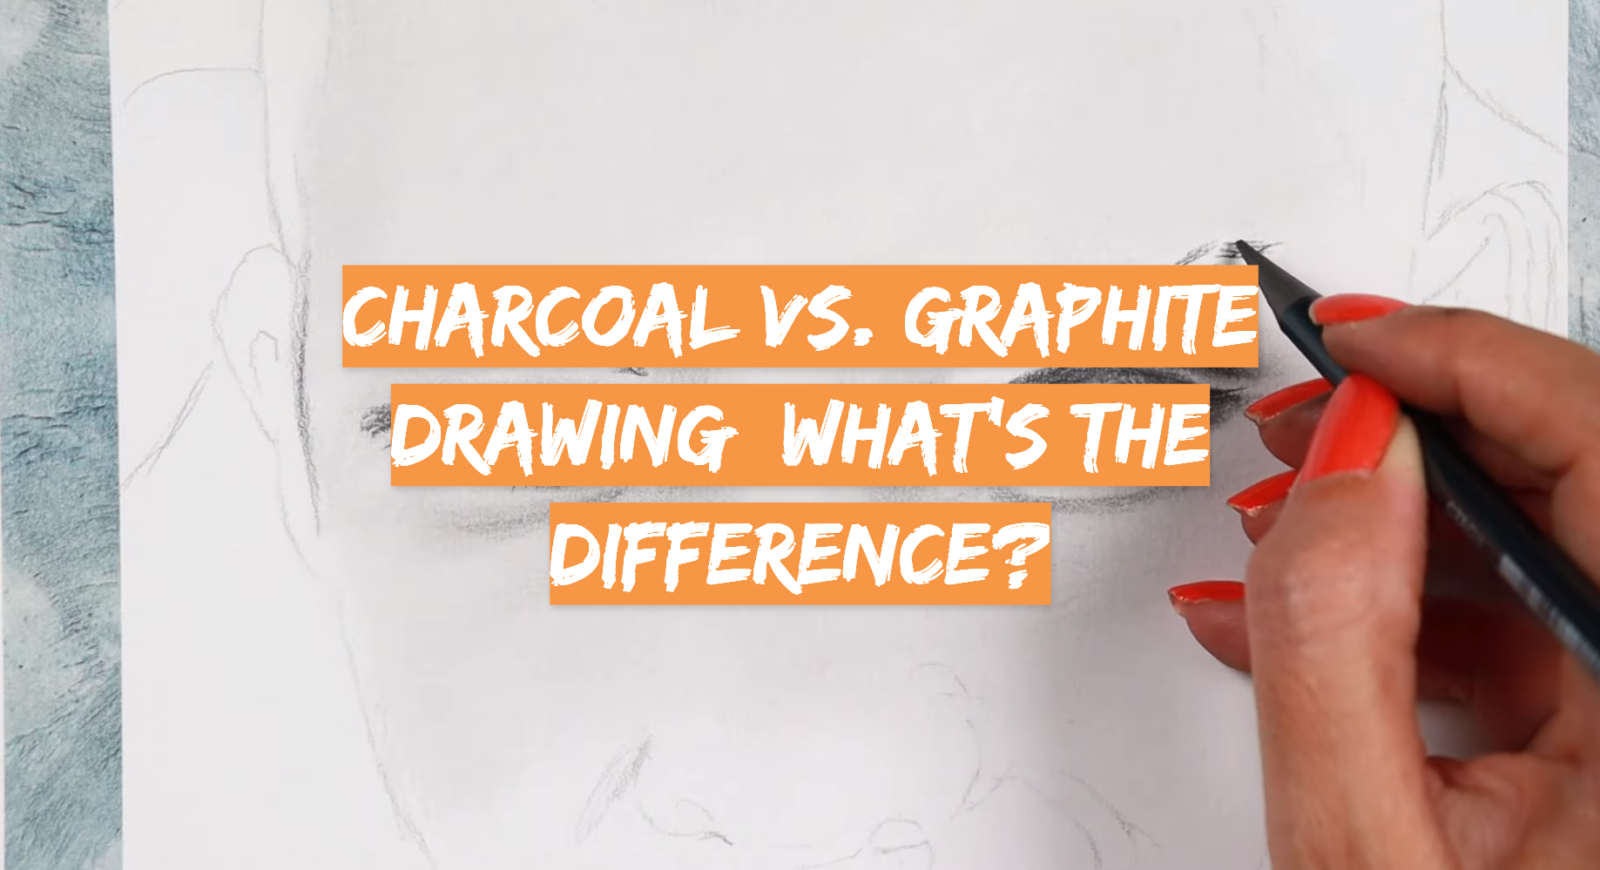 Charcoal vs. Graphite Drawing: What’s the Difference?